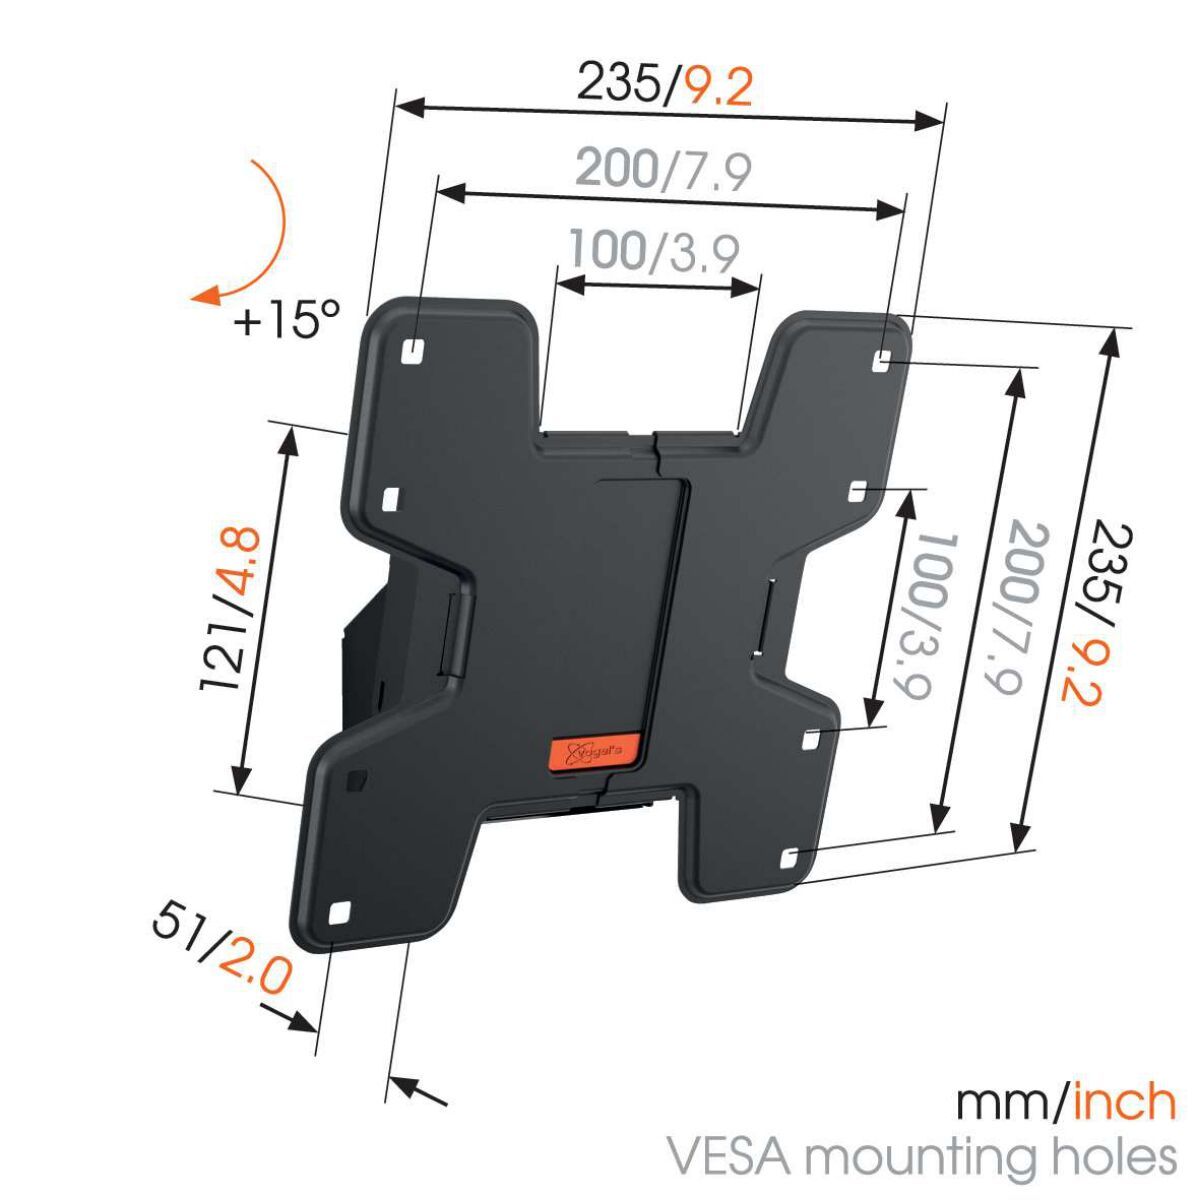 Vogel's W50610 Tilting TV Wall Mount - Suitable for 19 up to 43 inch TVs up to Tilt up to 15° - Dimensions